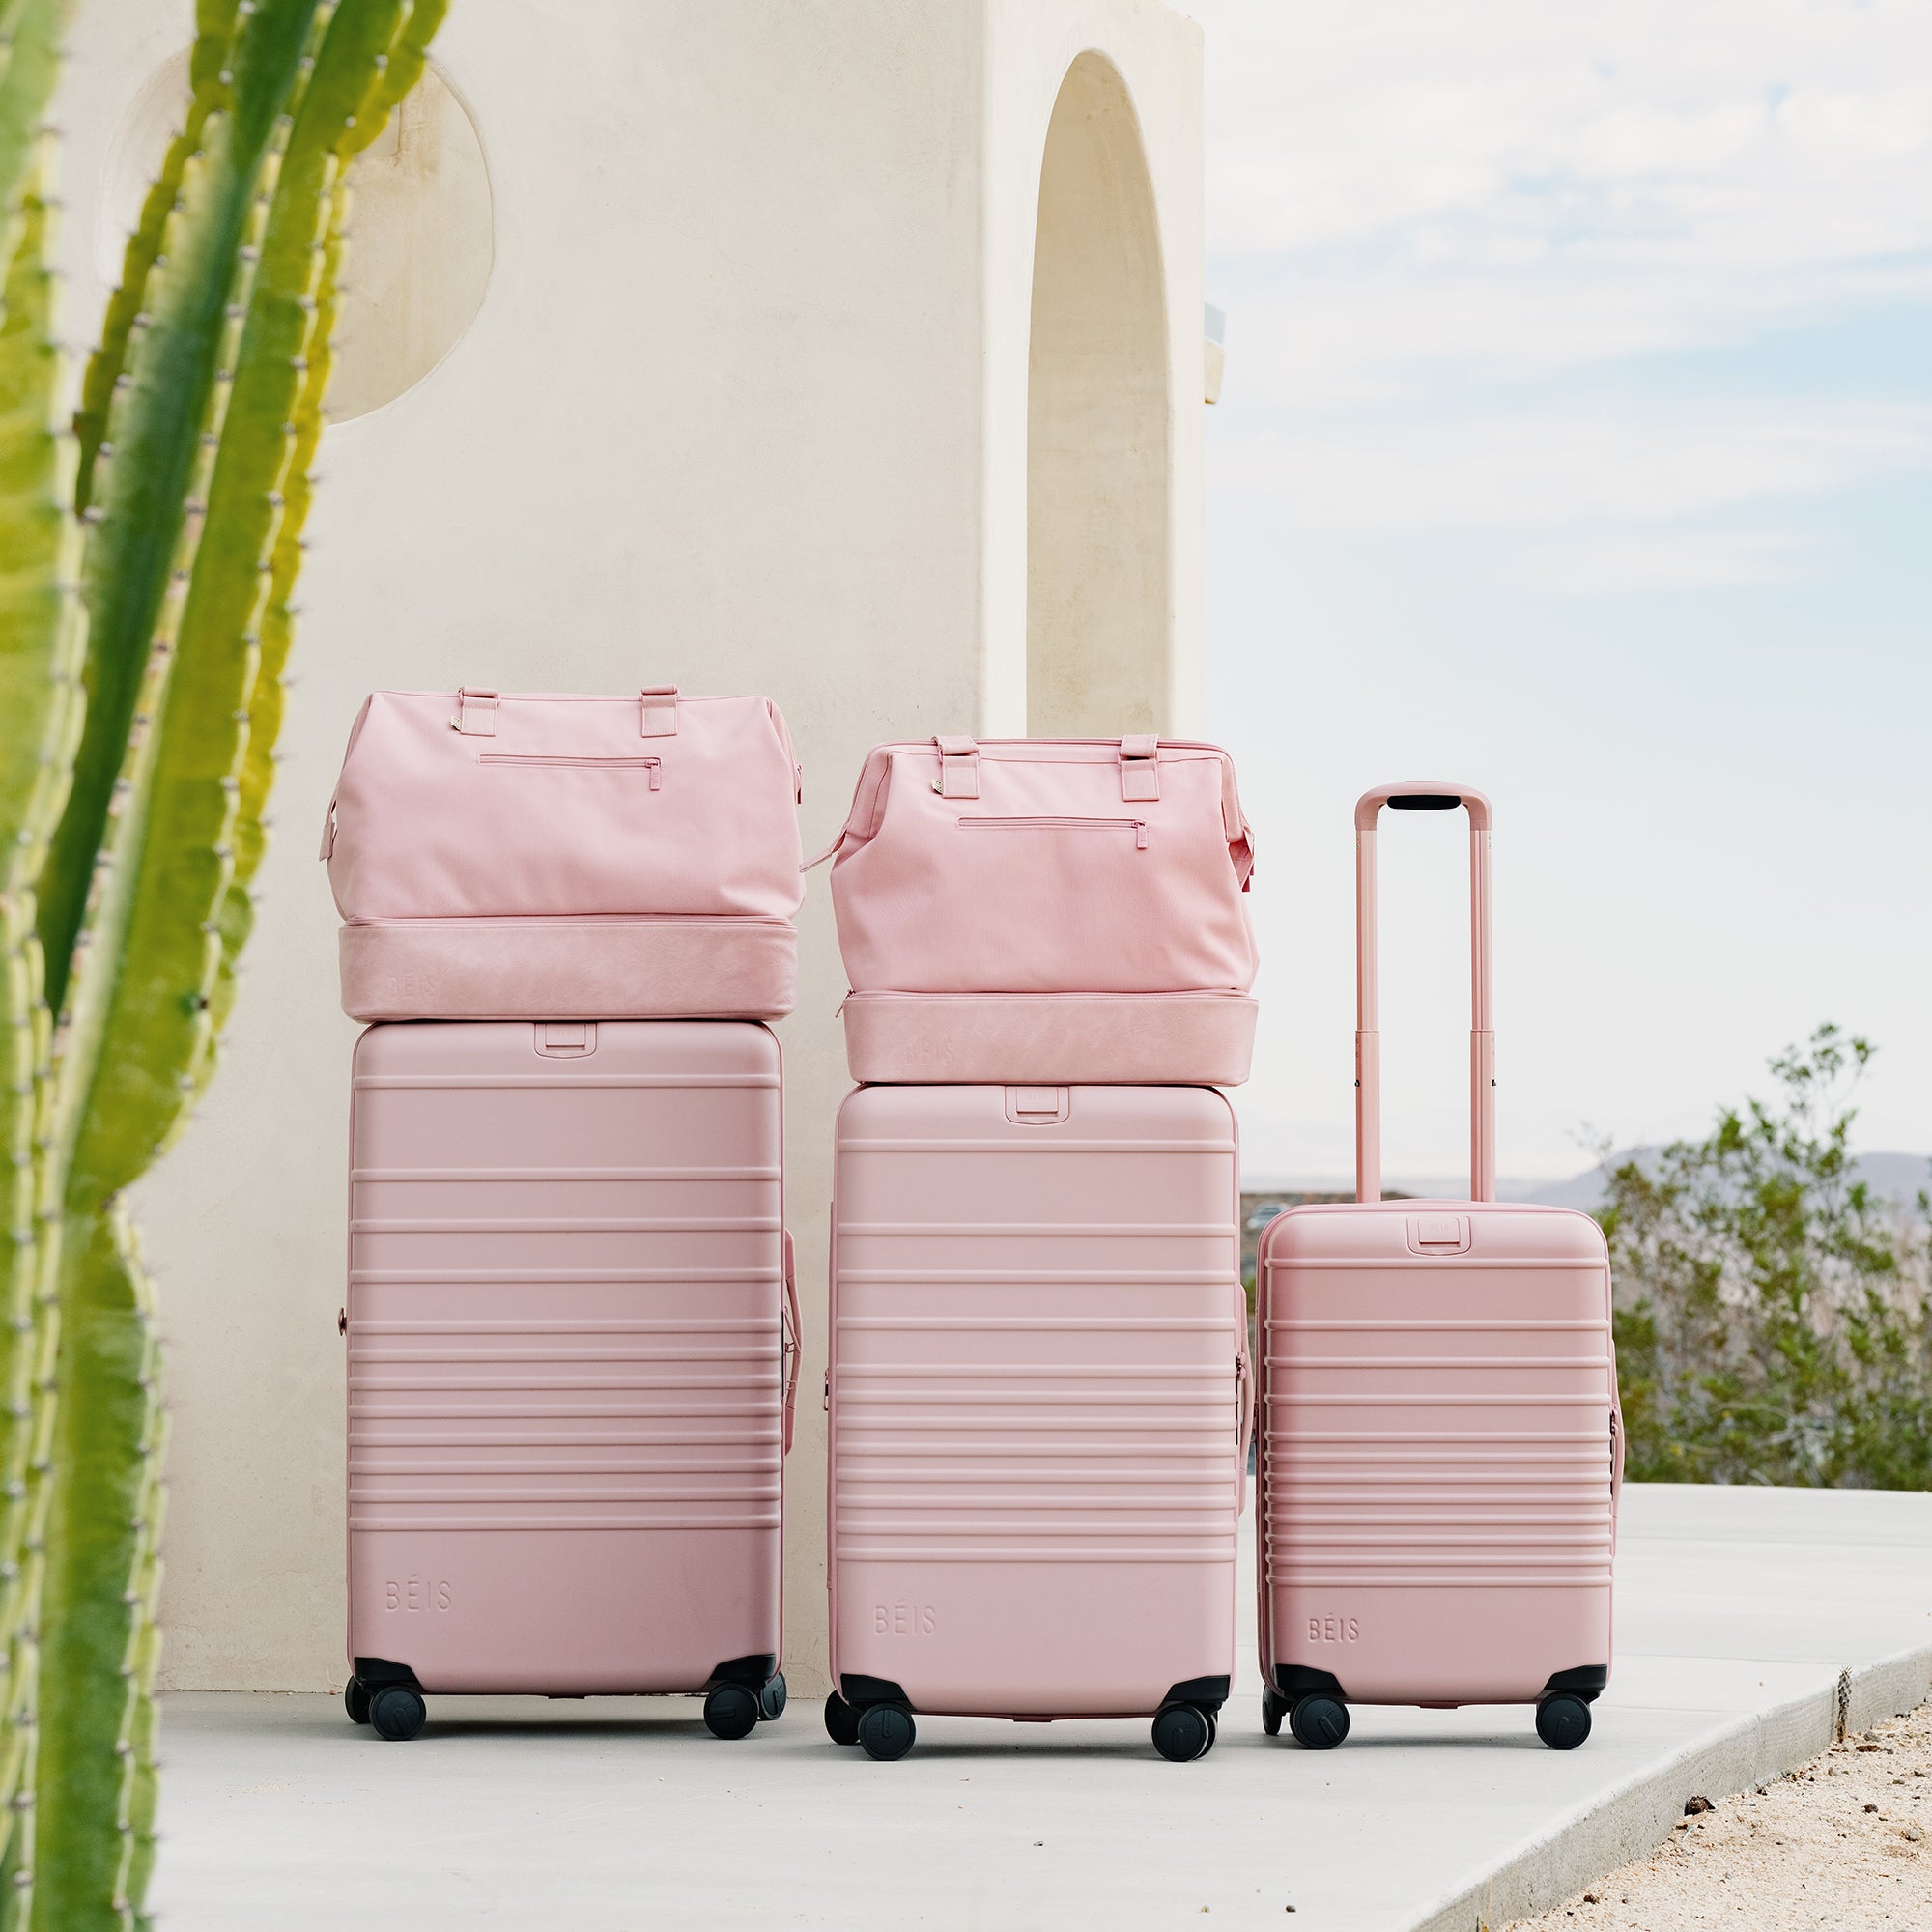 Away Just Launched an Accessories Line to Complete Your Travel Uniform